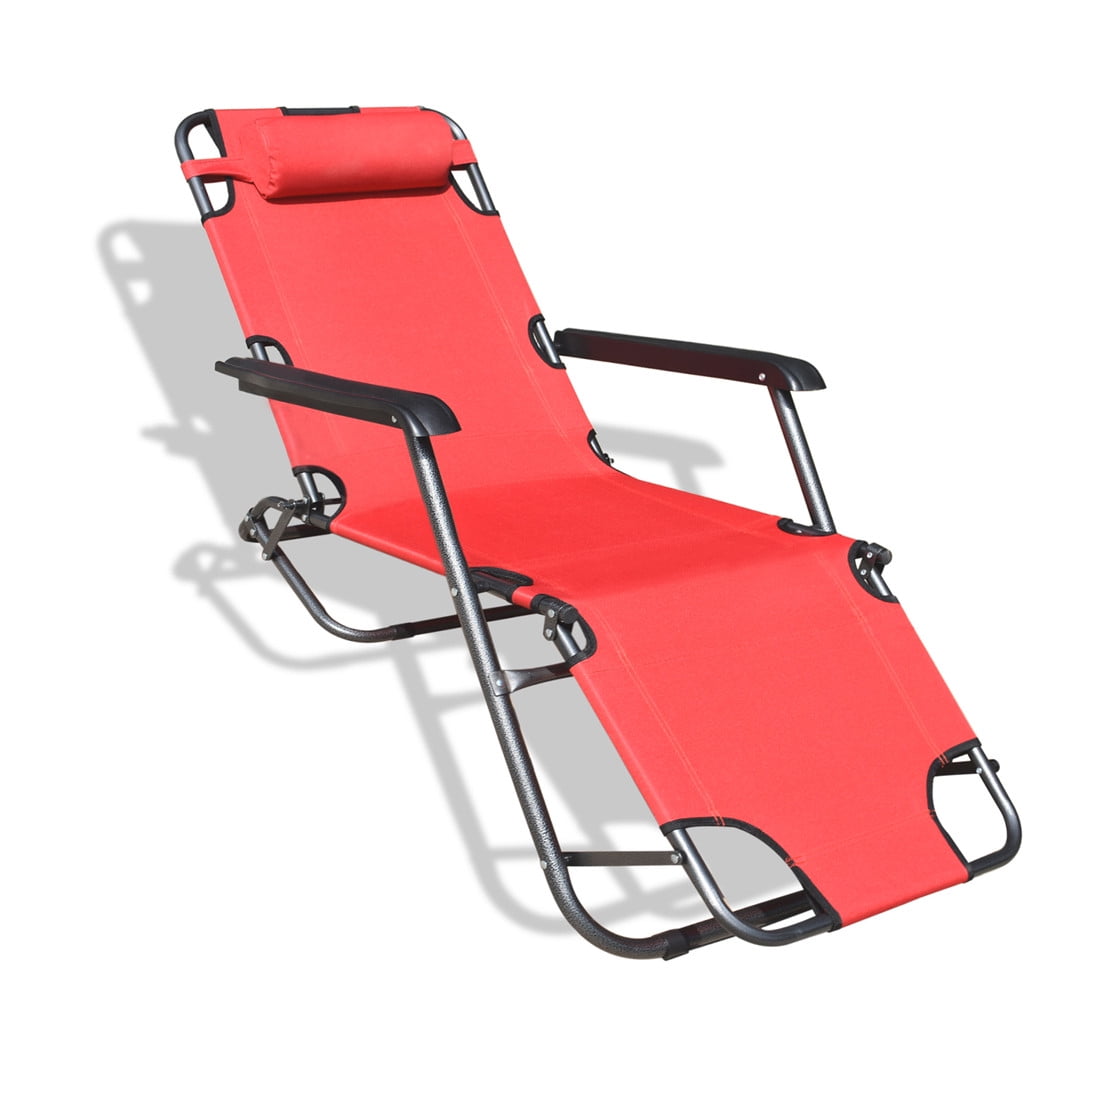 Color : A GWDJ Lounger Deck Chairs Solid Wood Simple Folding Chair/Outdoor Beach Canvas Lounge Chair/Pool Side Recliner/Outdoor Balcony Breathable Backrest Chair Relaxer Recliner